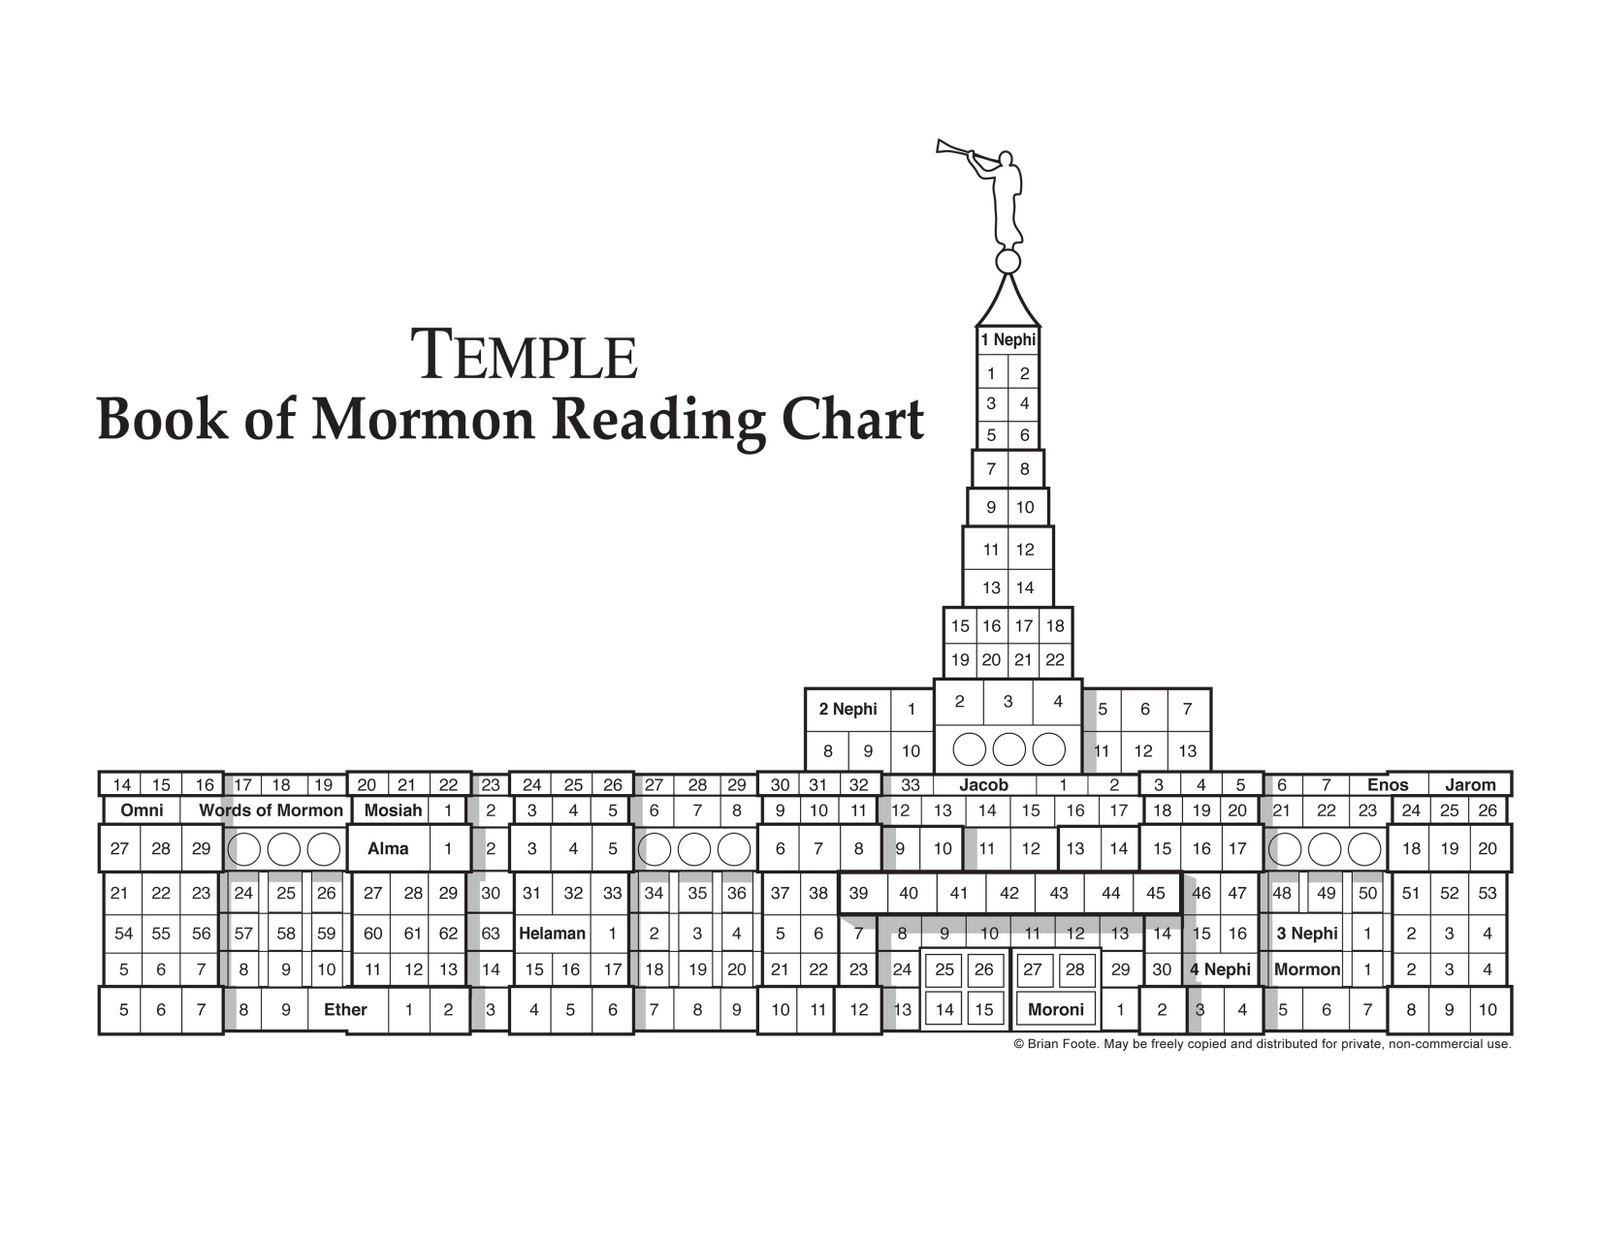 Charity Never Faileth: Book of Mormon Reading Chart Bookmark w